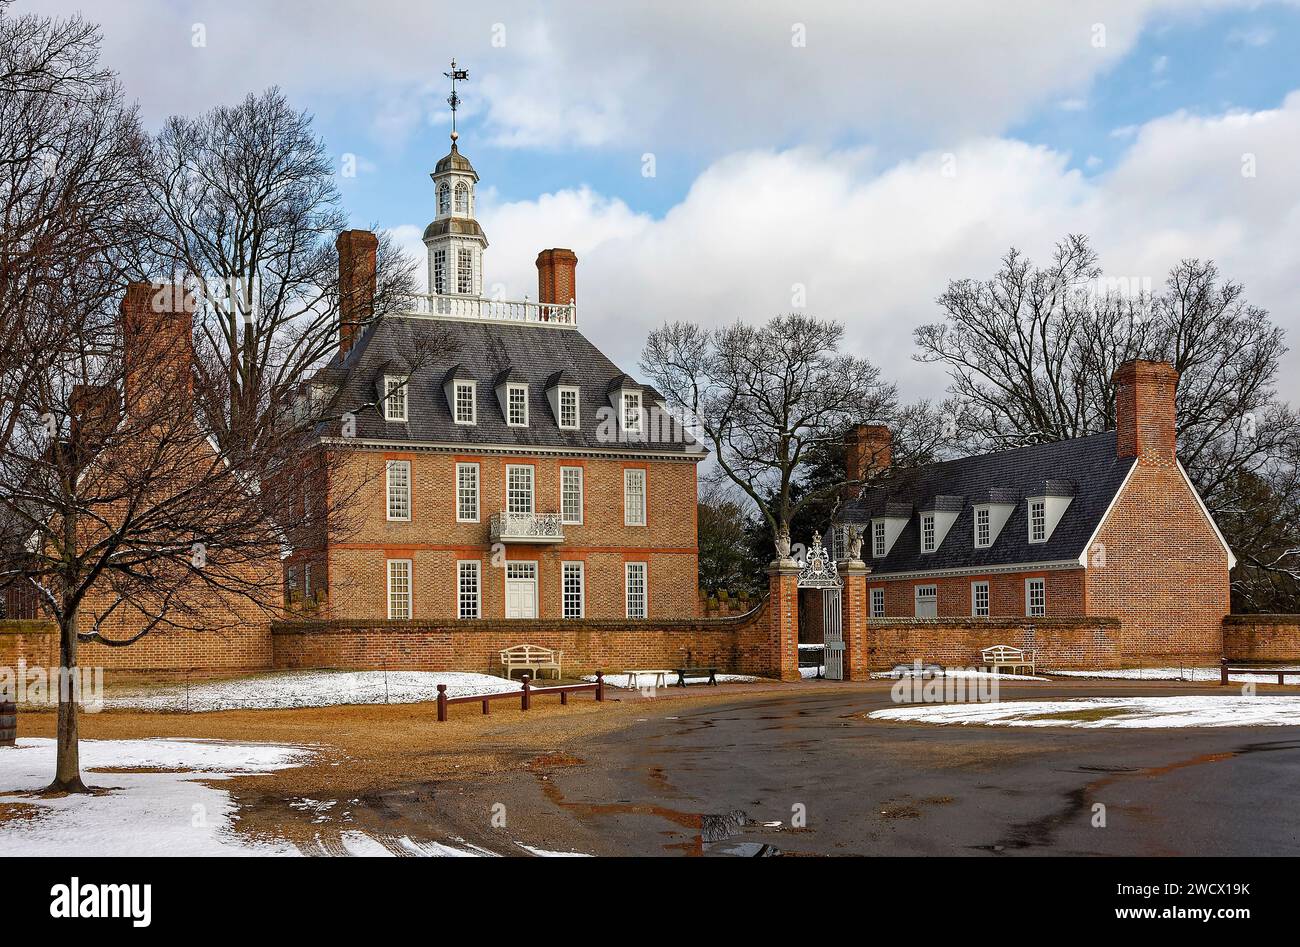 Governor's Palace, 1706, historic site, snow, brick building, colonial, low wall, symmetrical architecture, English baroque style, Colonial Revival re Stock Photo